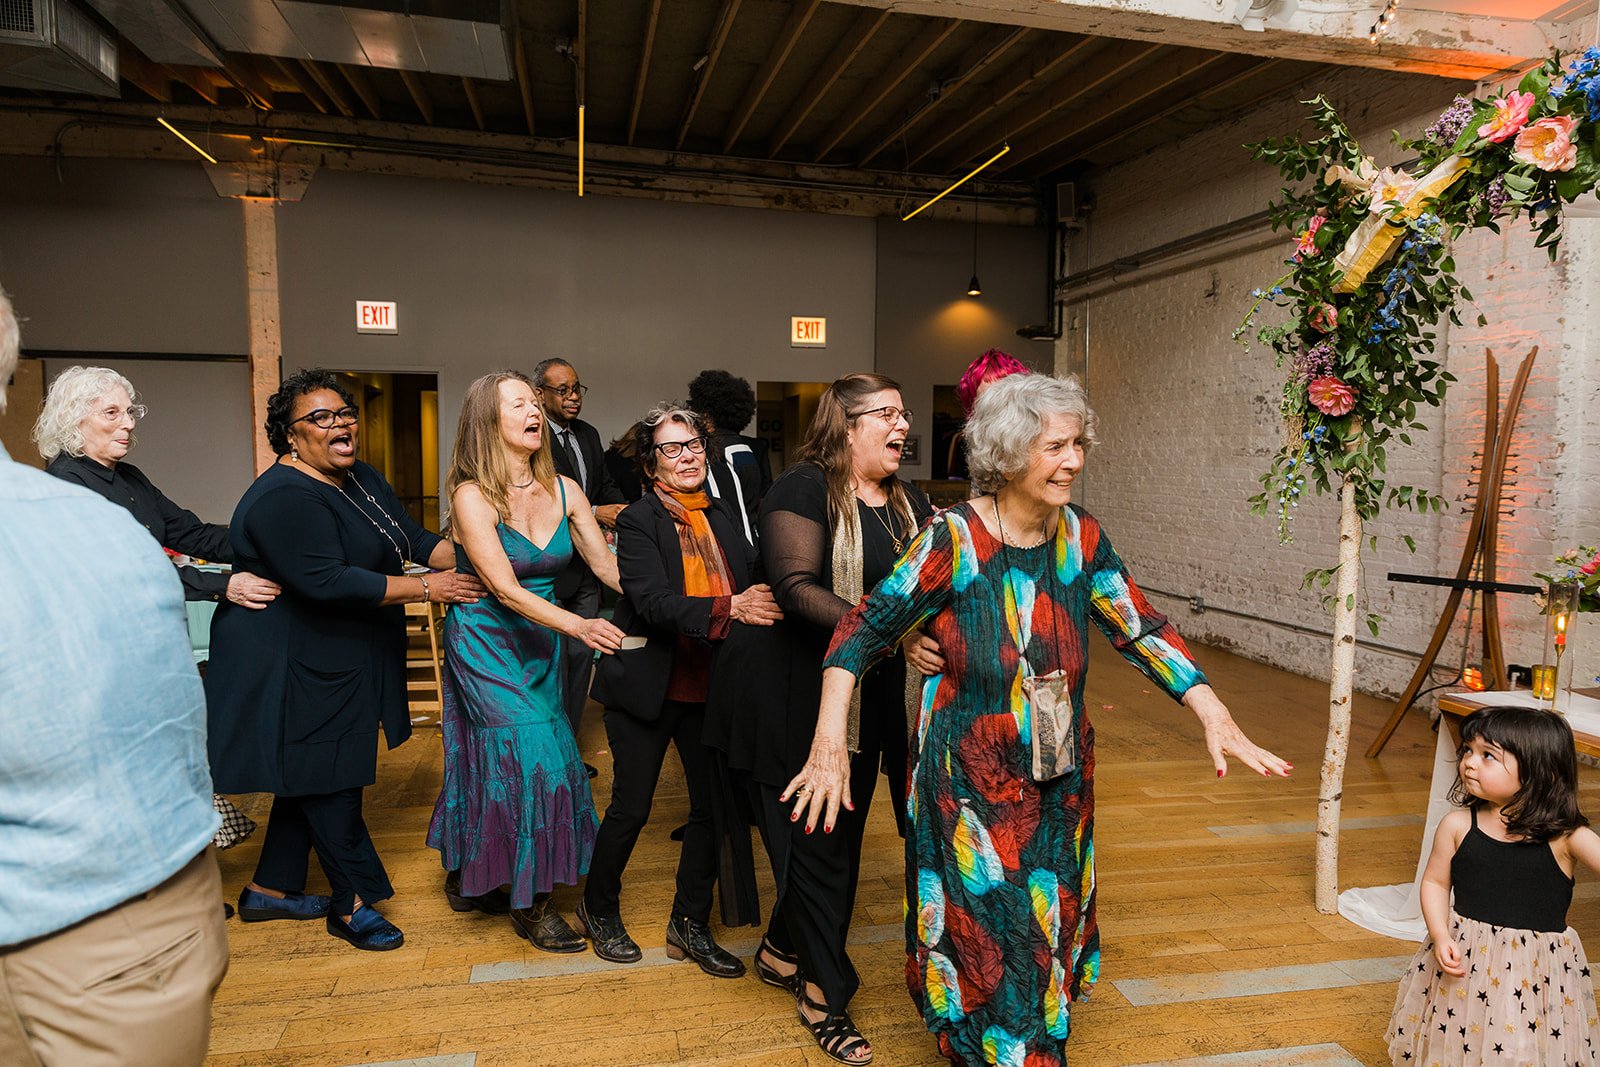  Documentary candid photo of a dance line of guests at nontraditional Jewish and Venezuelan wedding at The Joinery Chicago an Industrial loft wedding venue In Logan Square.  